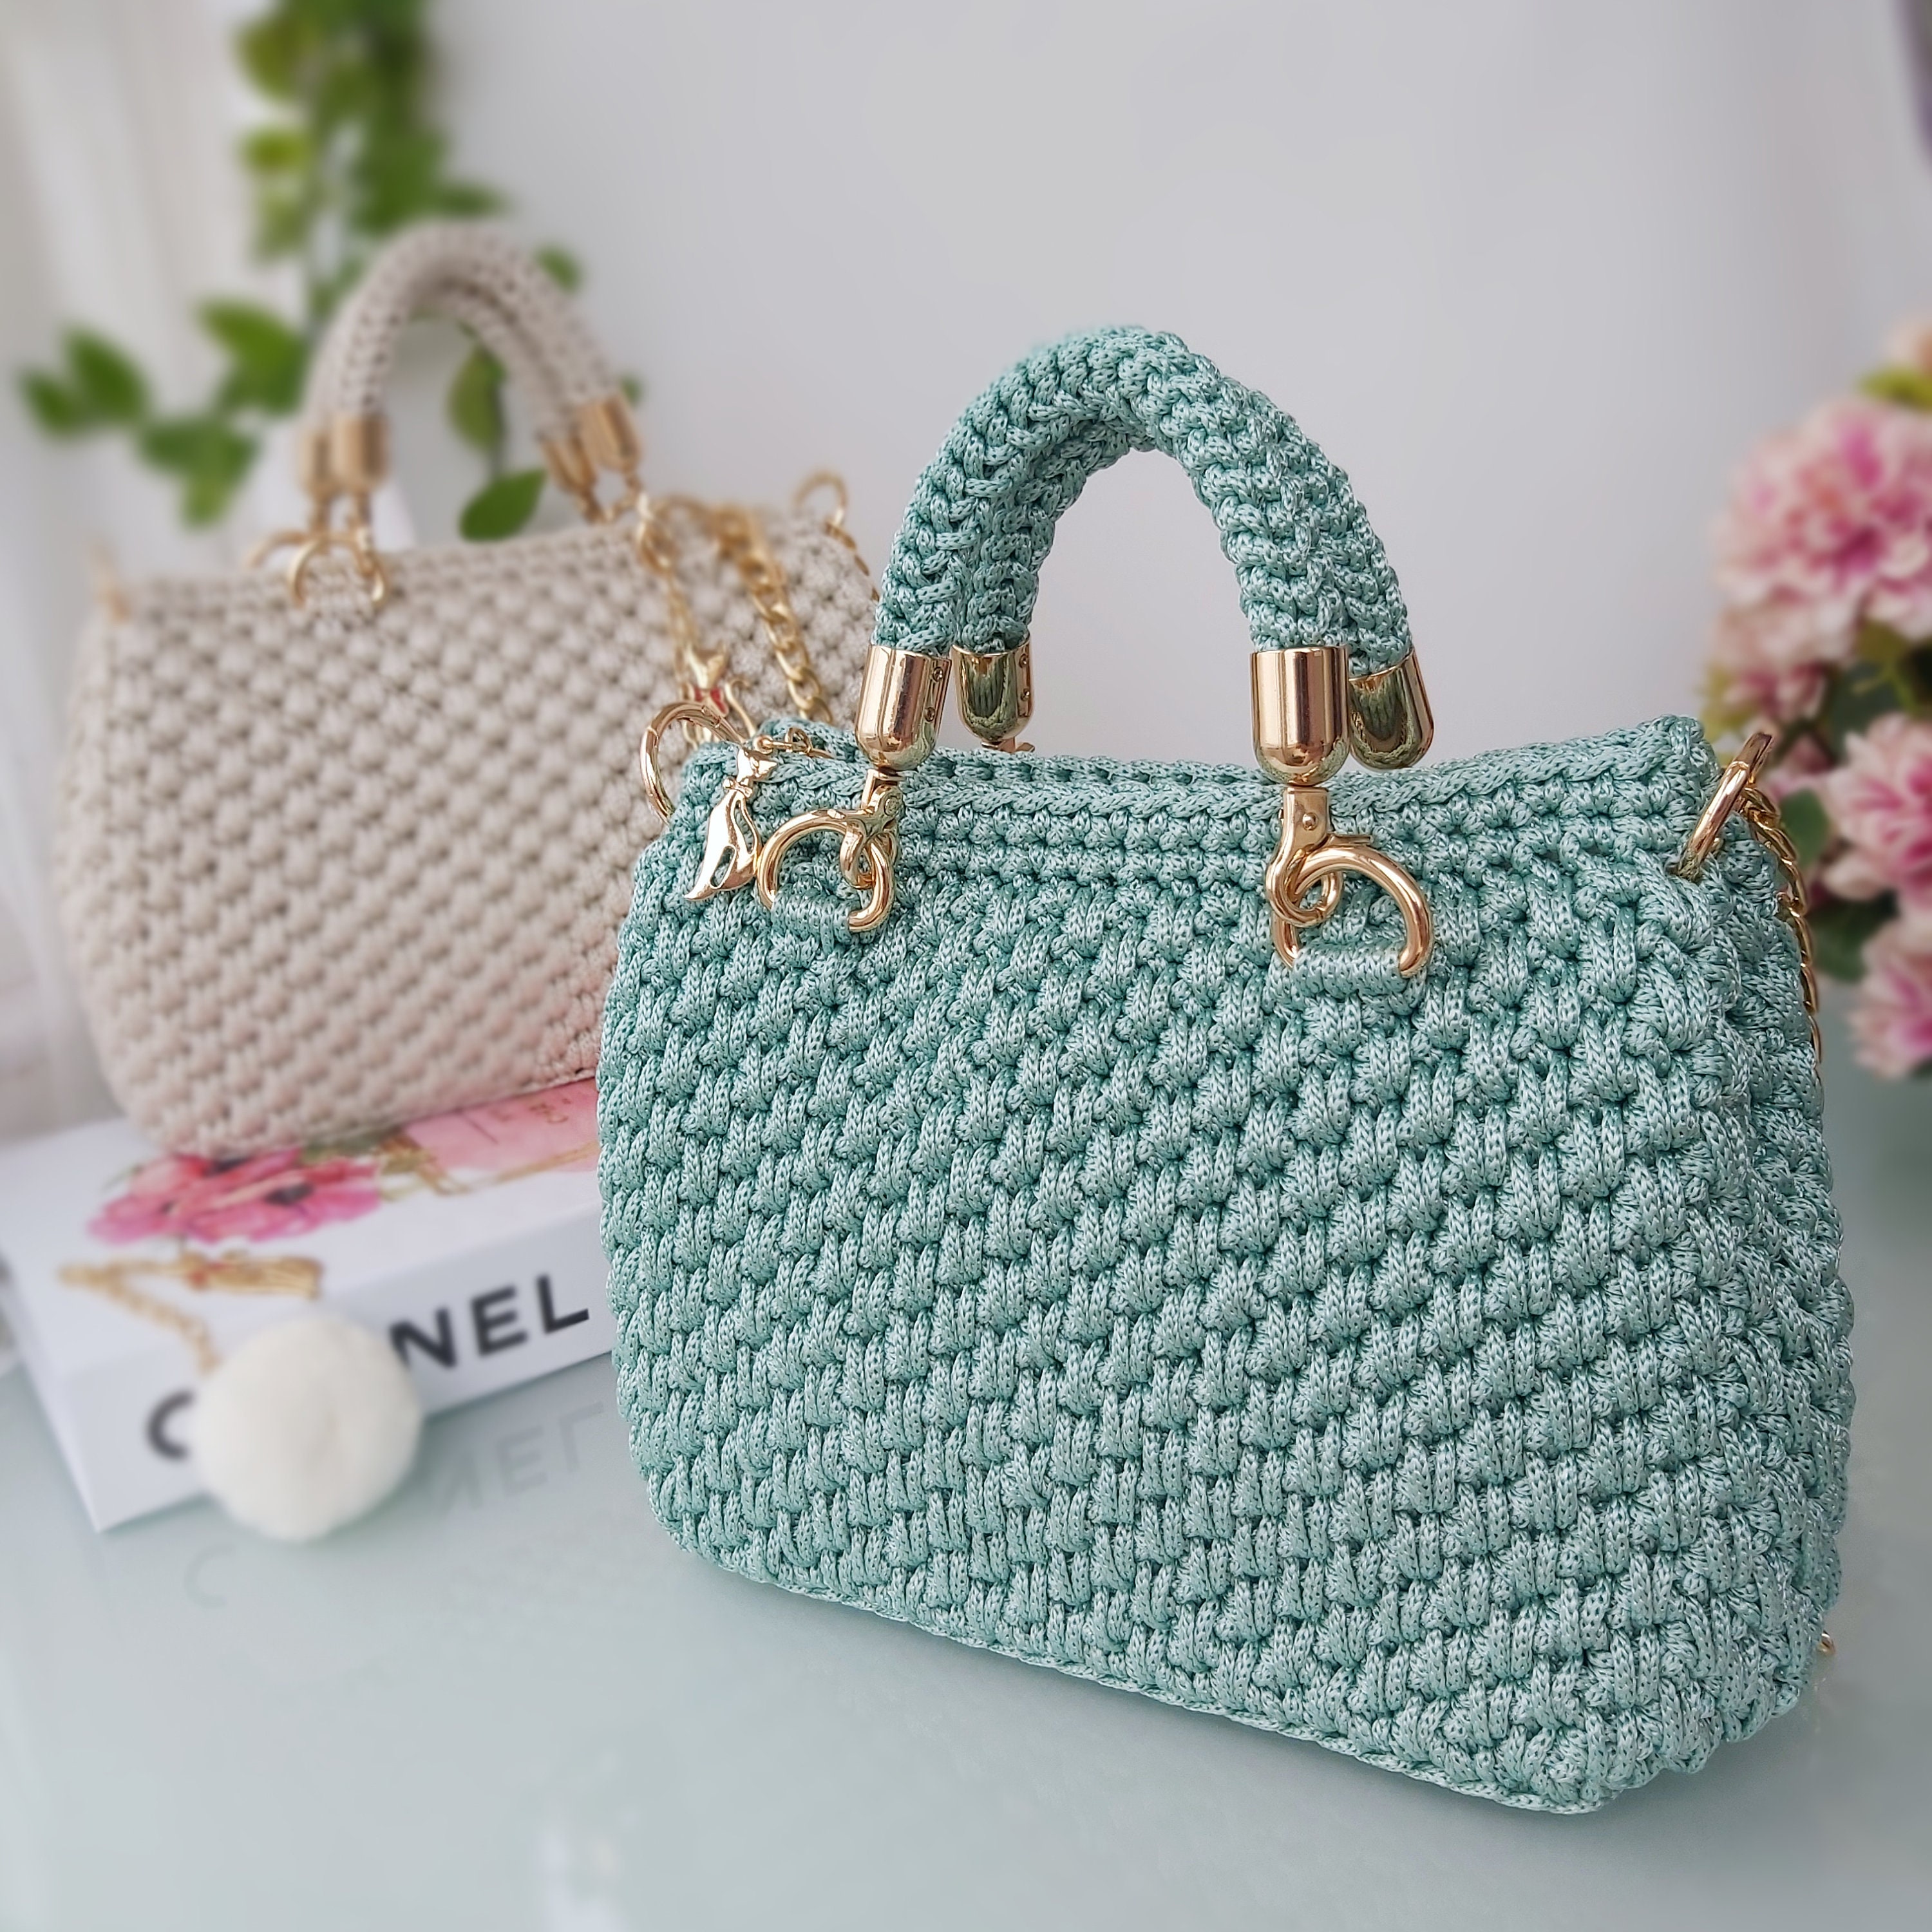  Handmade Crochet Bags and Totes for Women, Handwoven Cute  Aesthetic Knit Tote Bag, Shoulder Handbag, Accessory Women Gift Bag, Made  of Cotton (mint-cream) : Handmade Products